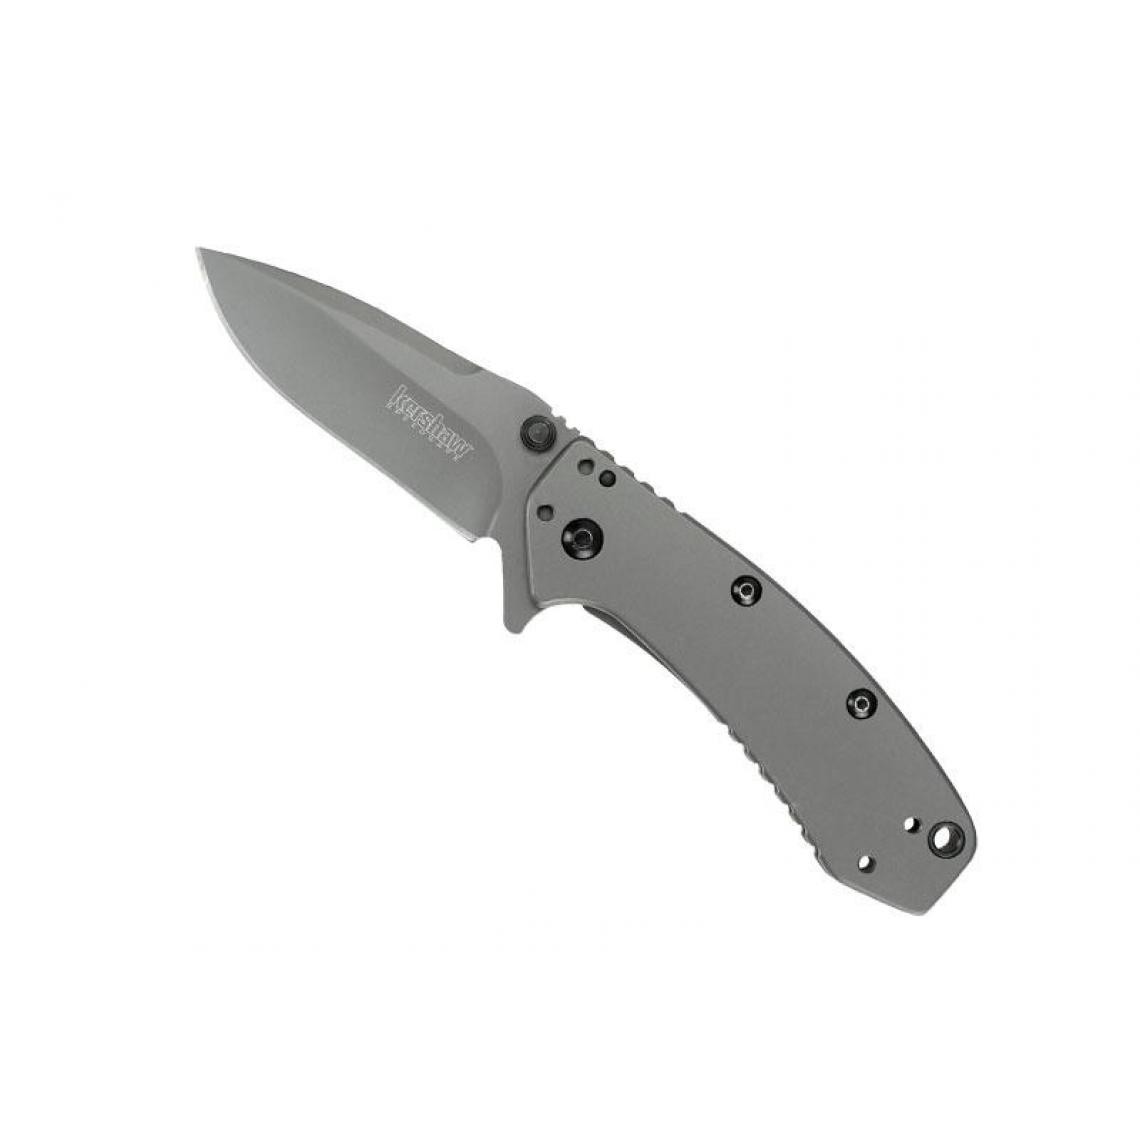 Divers Marques - KERSHAW - KS.1555TI - COUTEAU KERSHAW CRYO - Outils de coupe